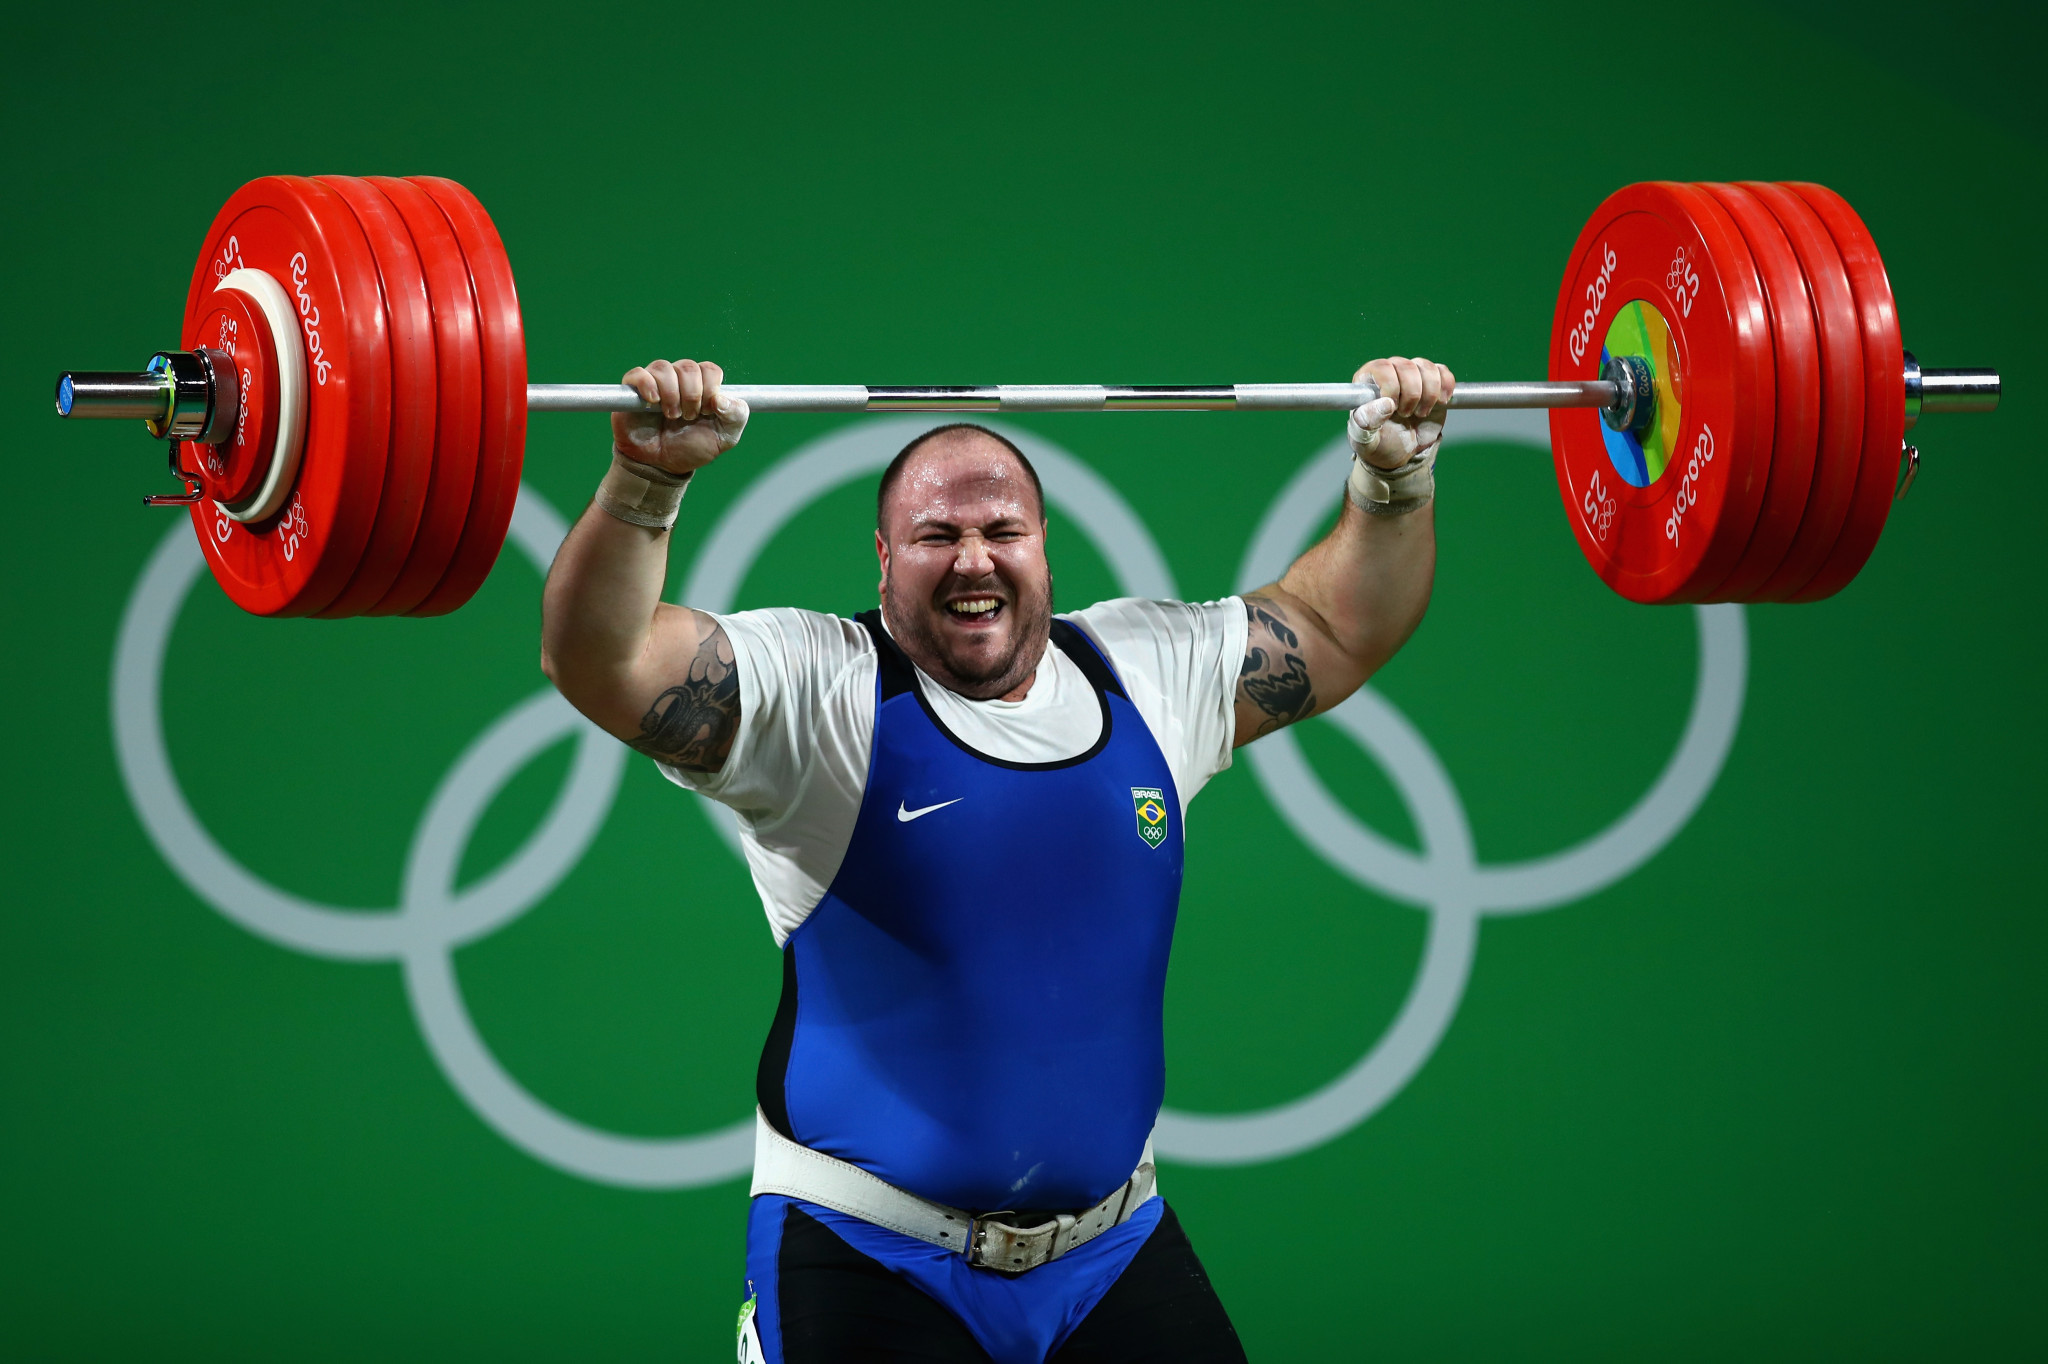 Fernando Reis will be a representative of Brazil at the IWF World Championships in California  ©Getty Images